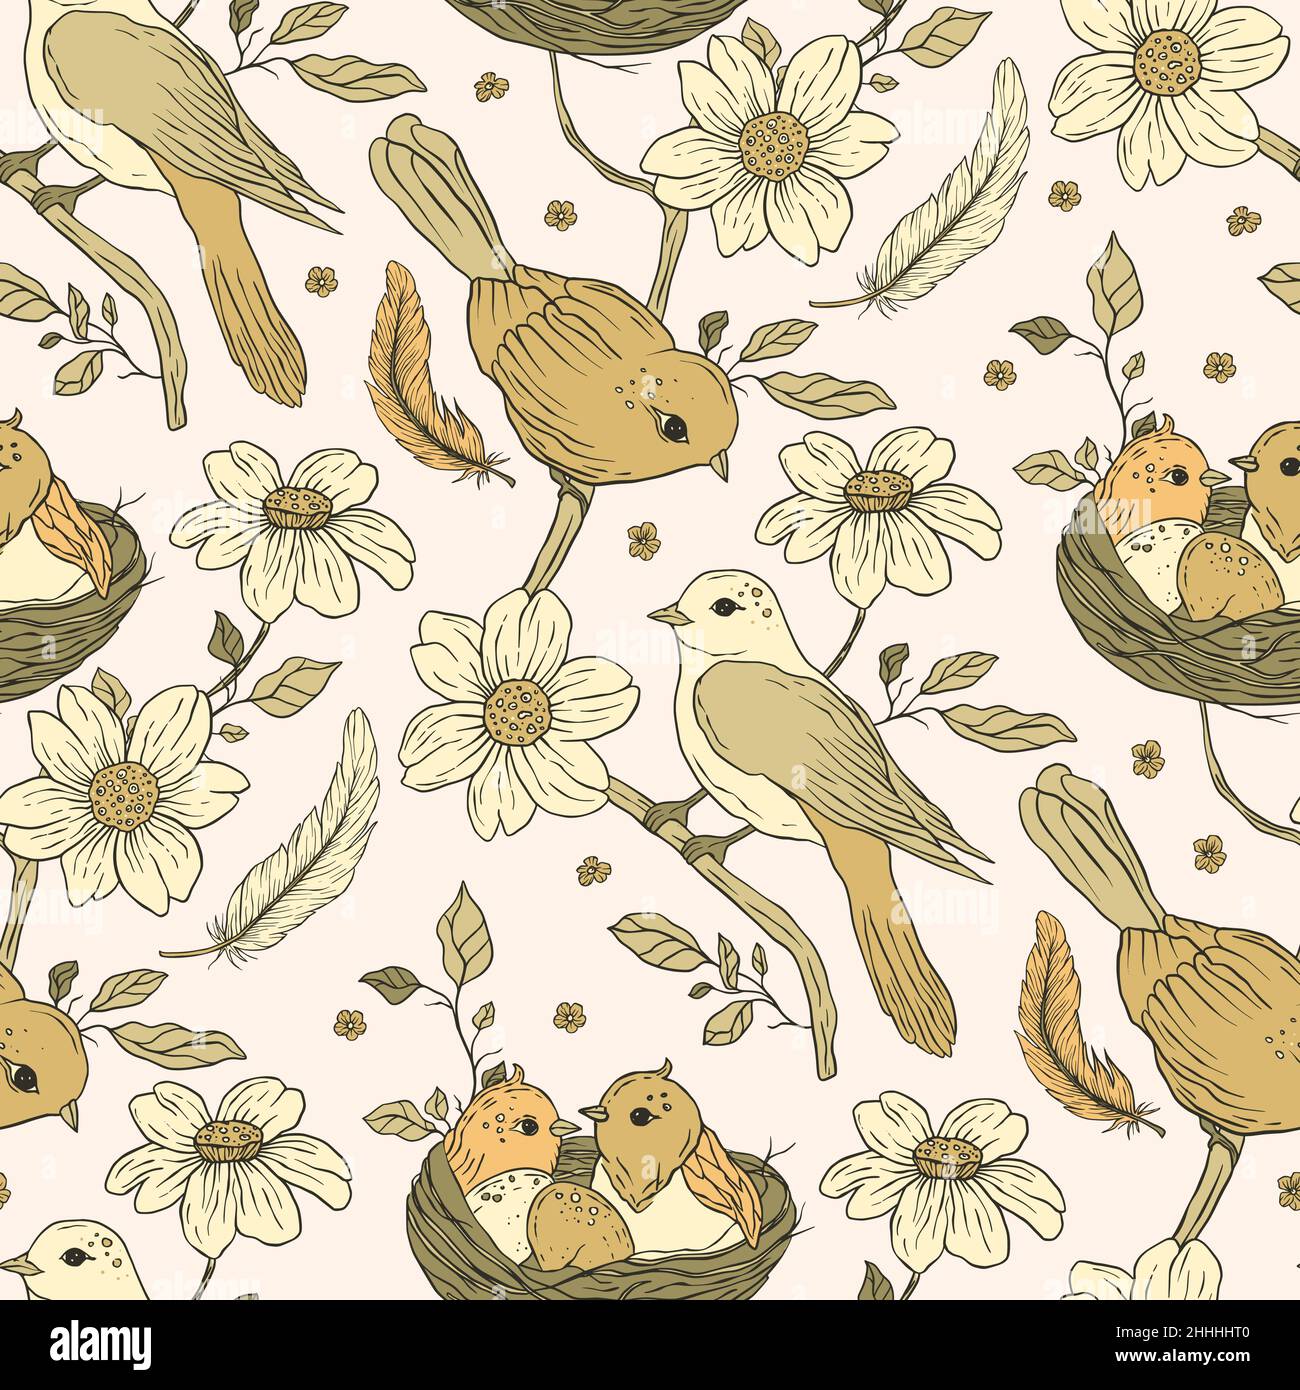 Vintage aesthetic bird nest boho floral seamless pattern with flower Stock Vector